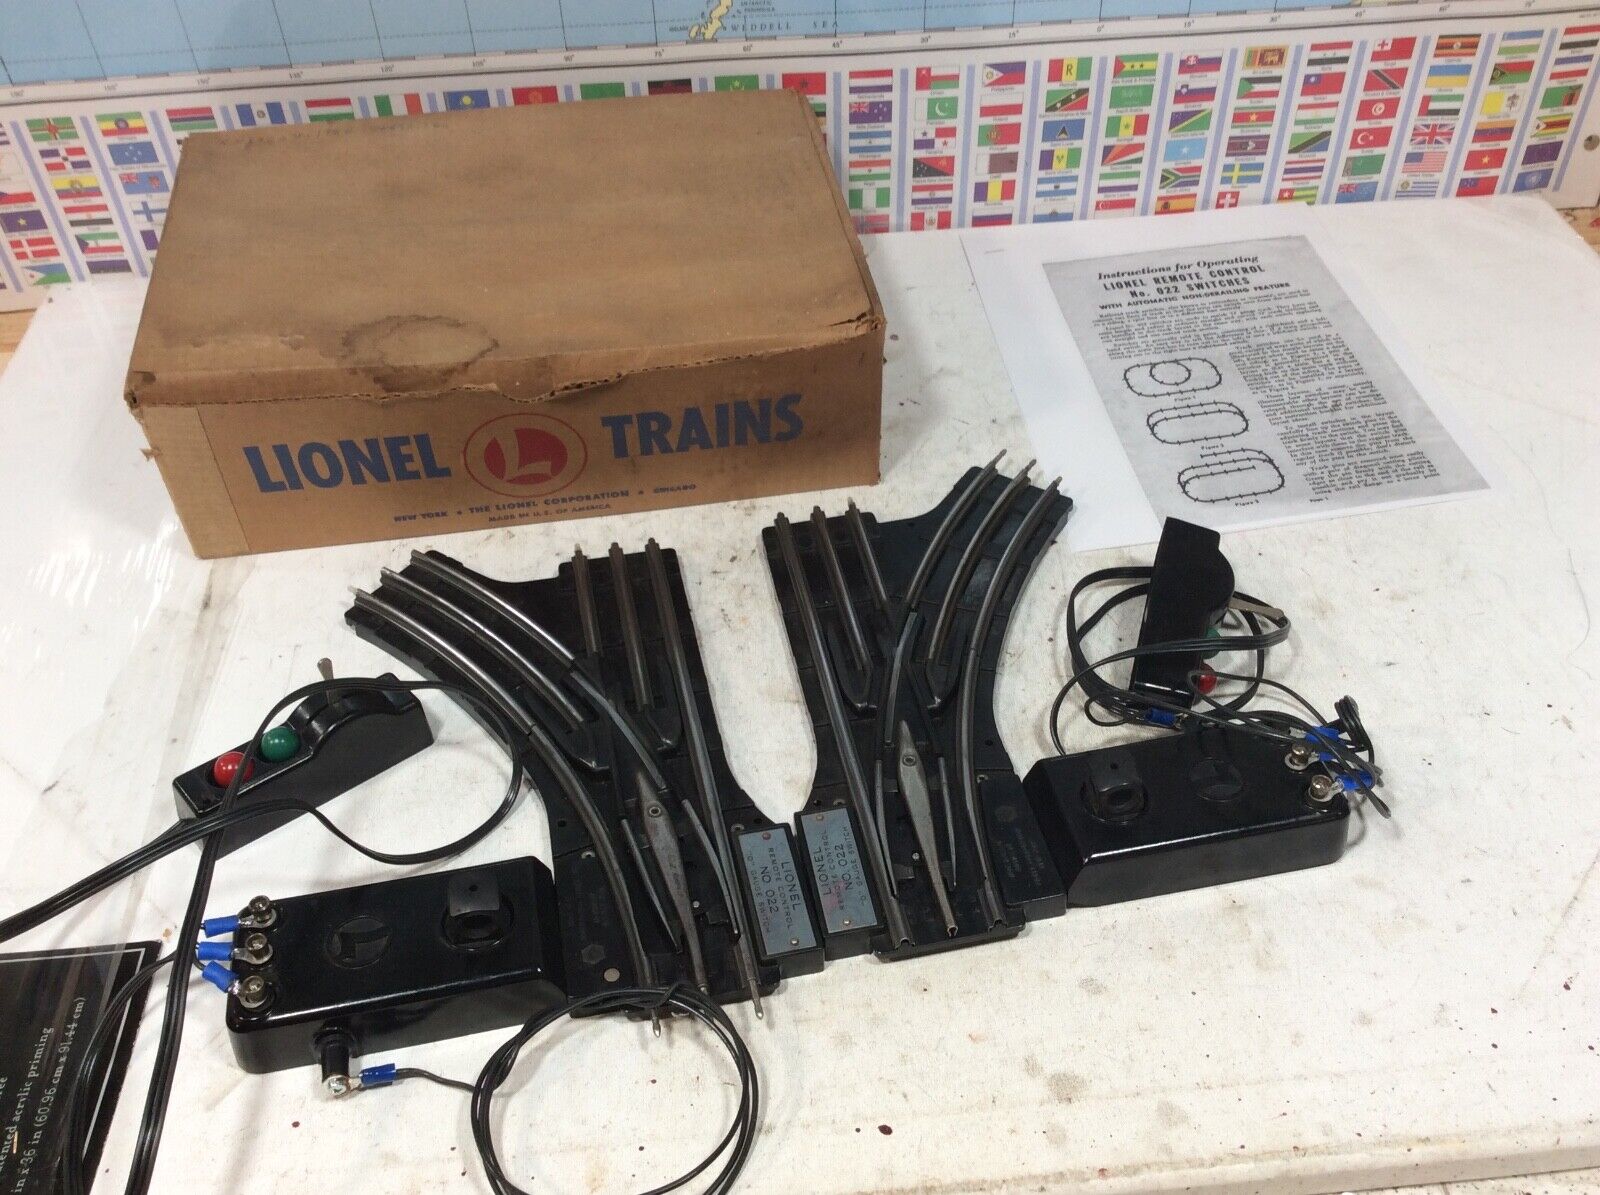 Lionel 022 remote Control   pair switches O Gauge for Train Layout